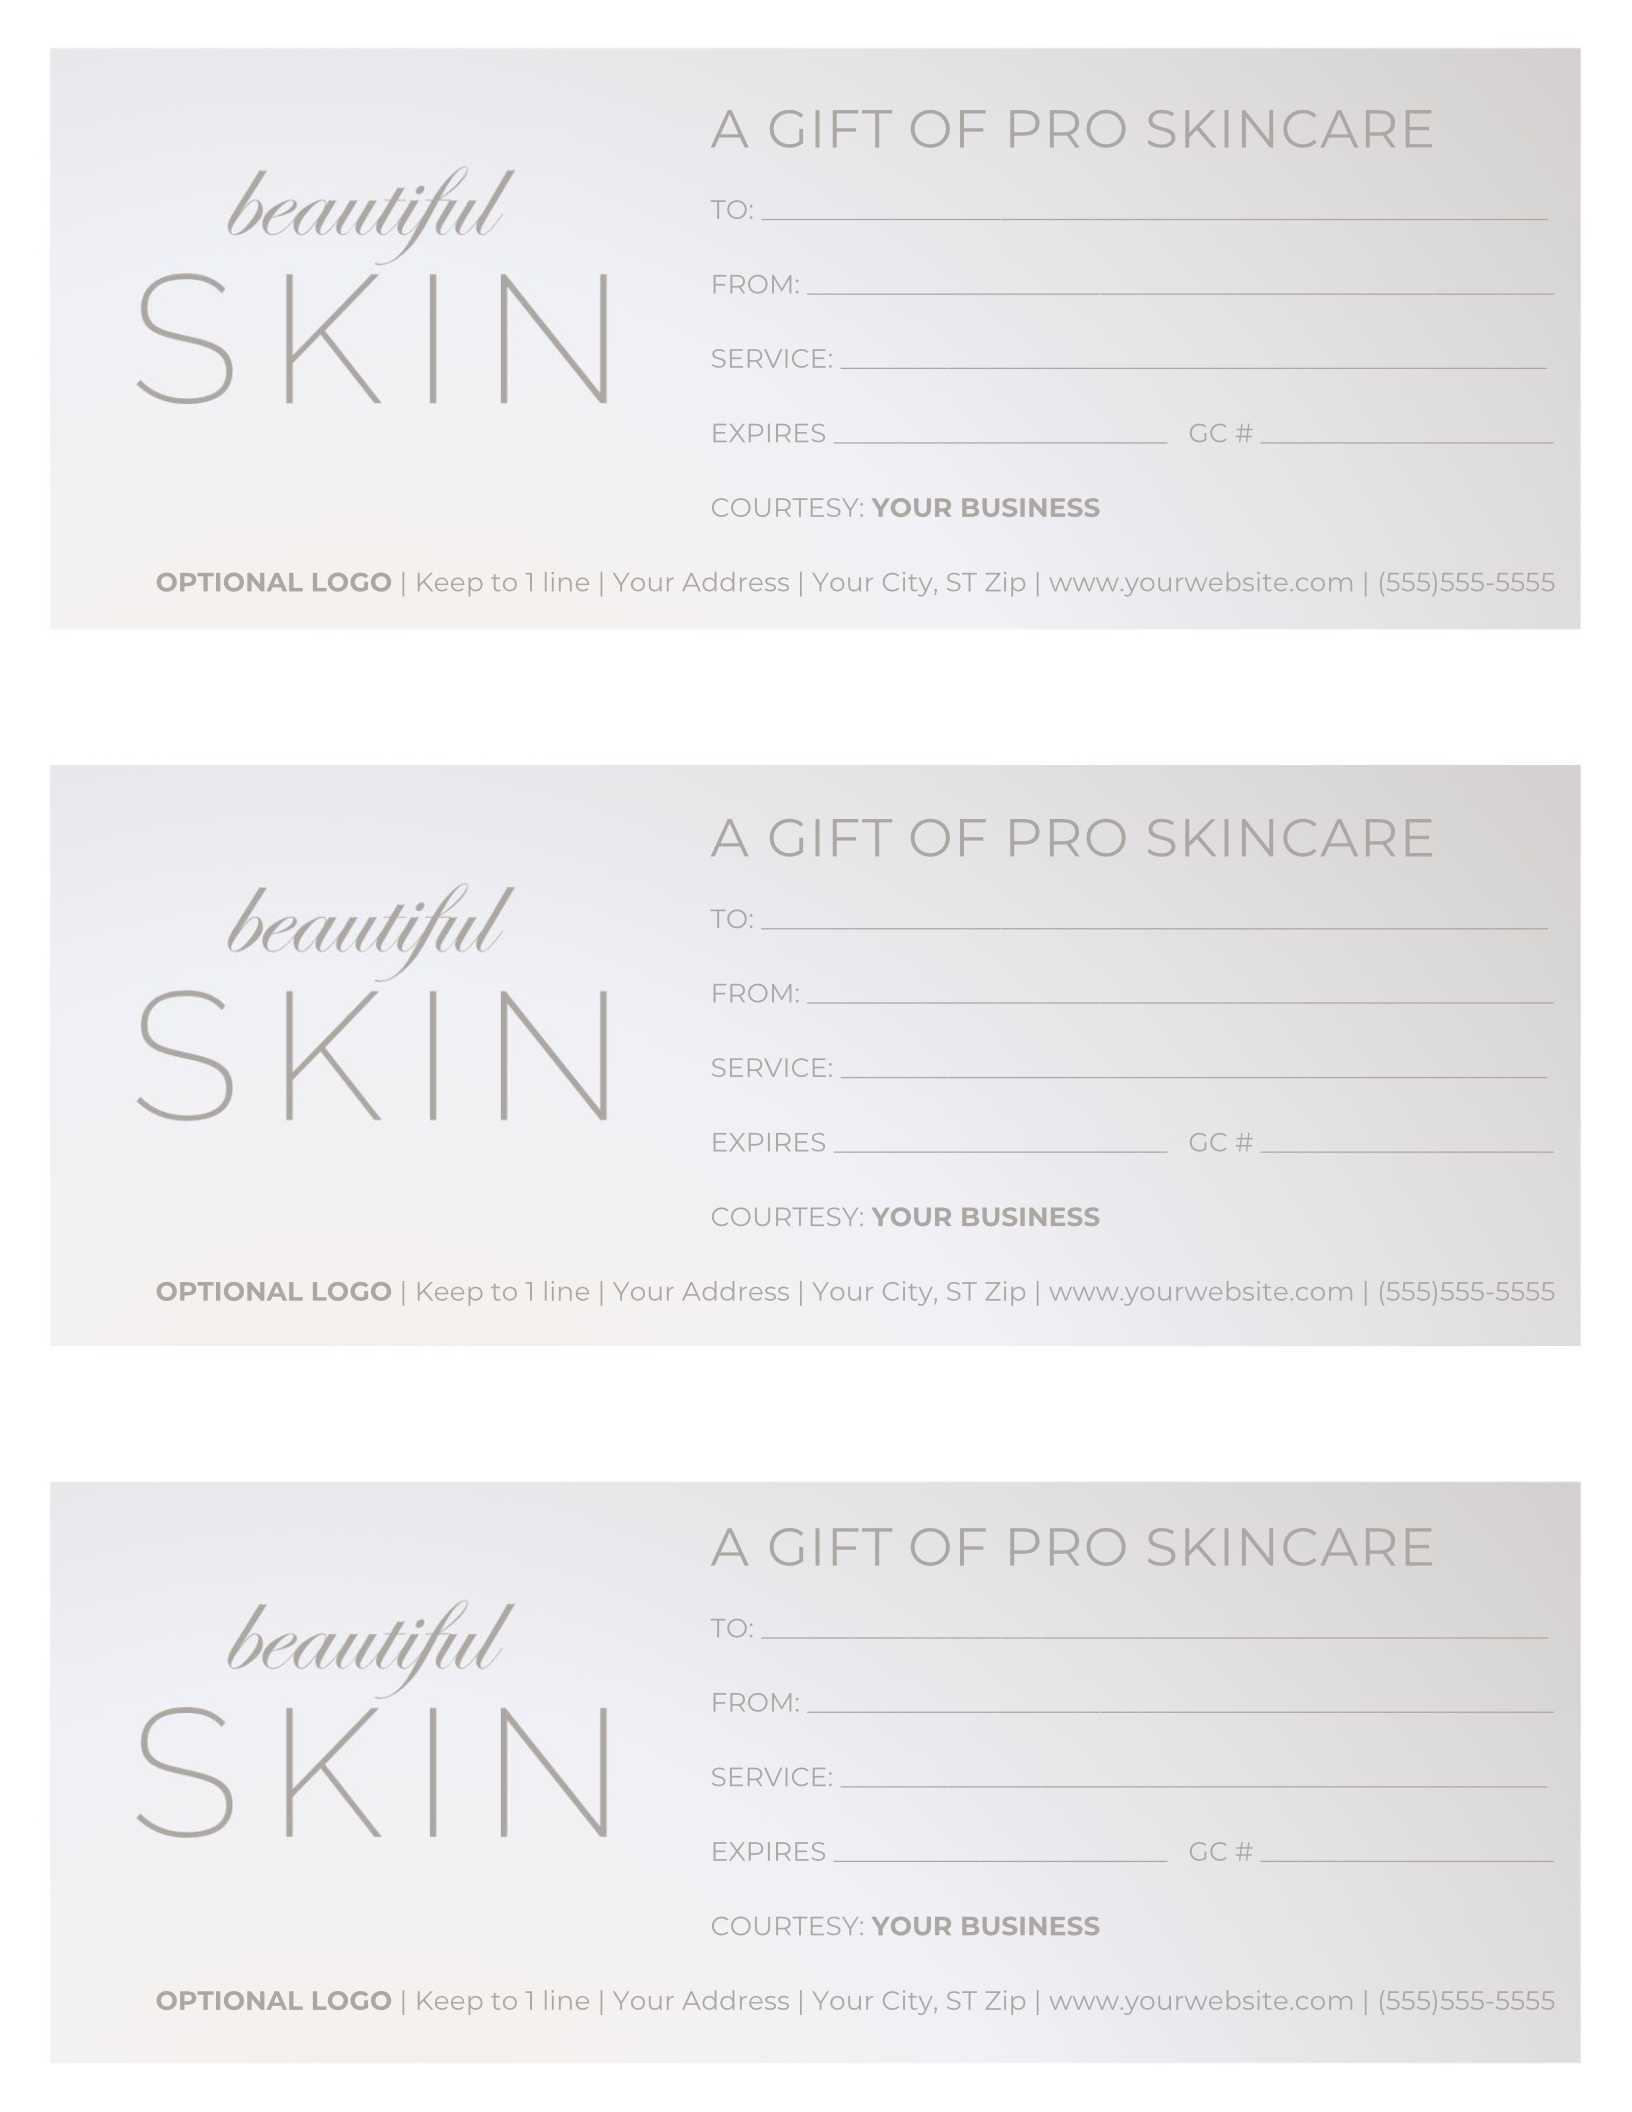 Free Gift Certificate Templates For Massage And Spa Within Gift Certificate Log Template